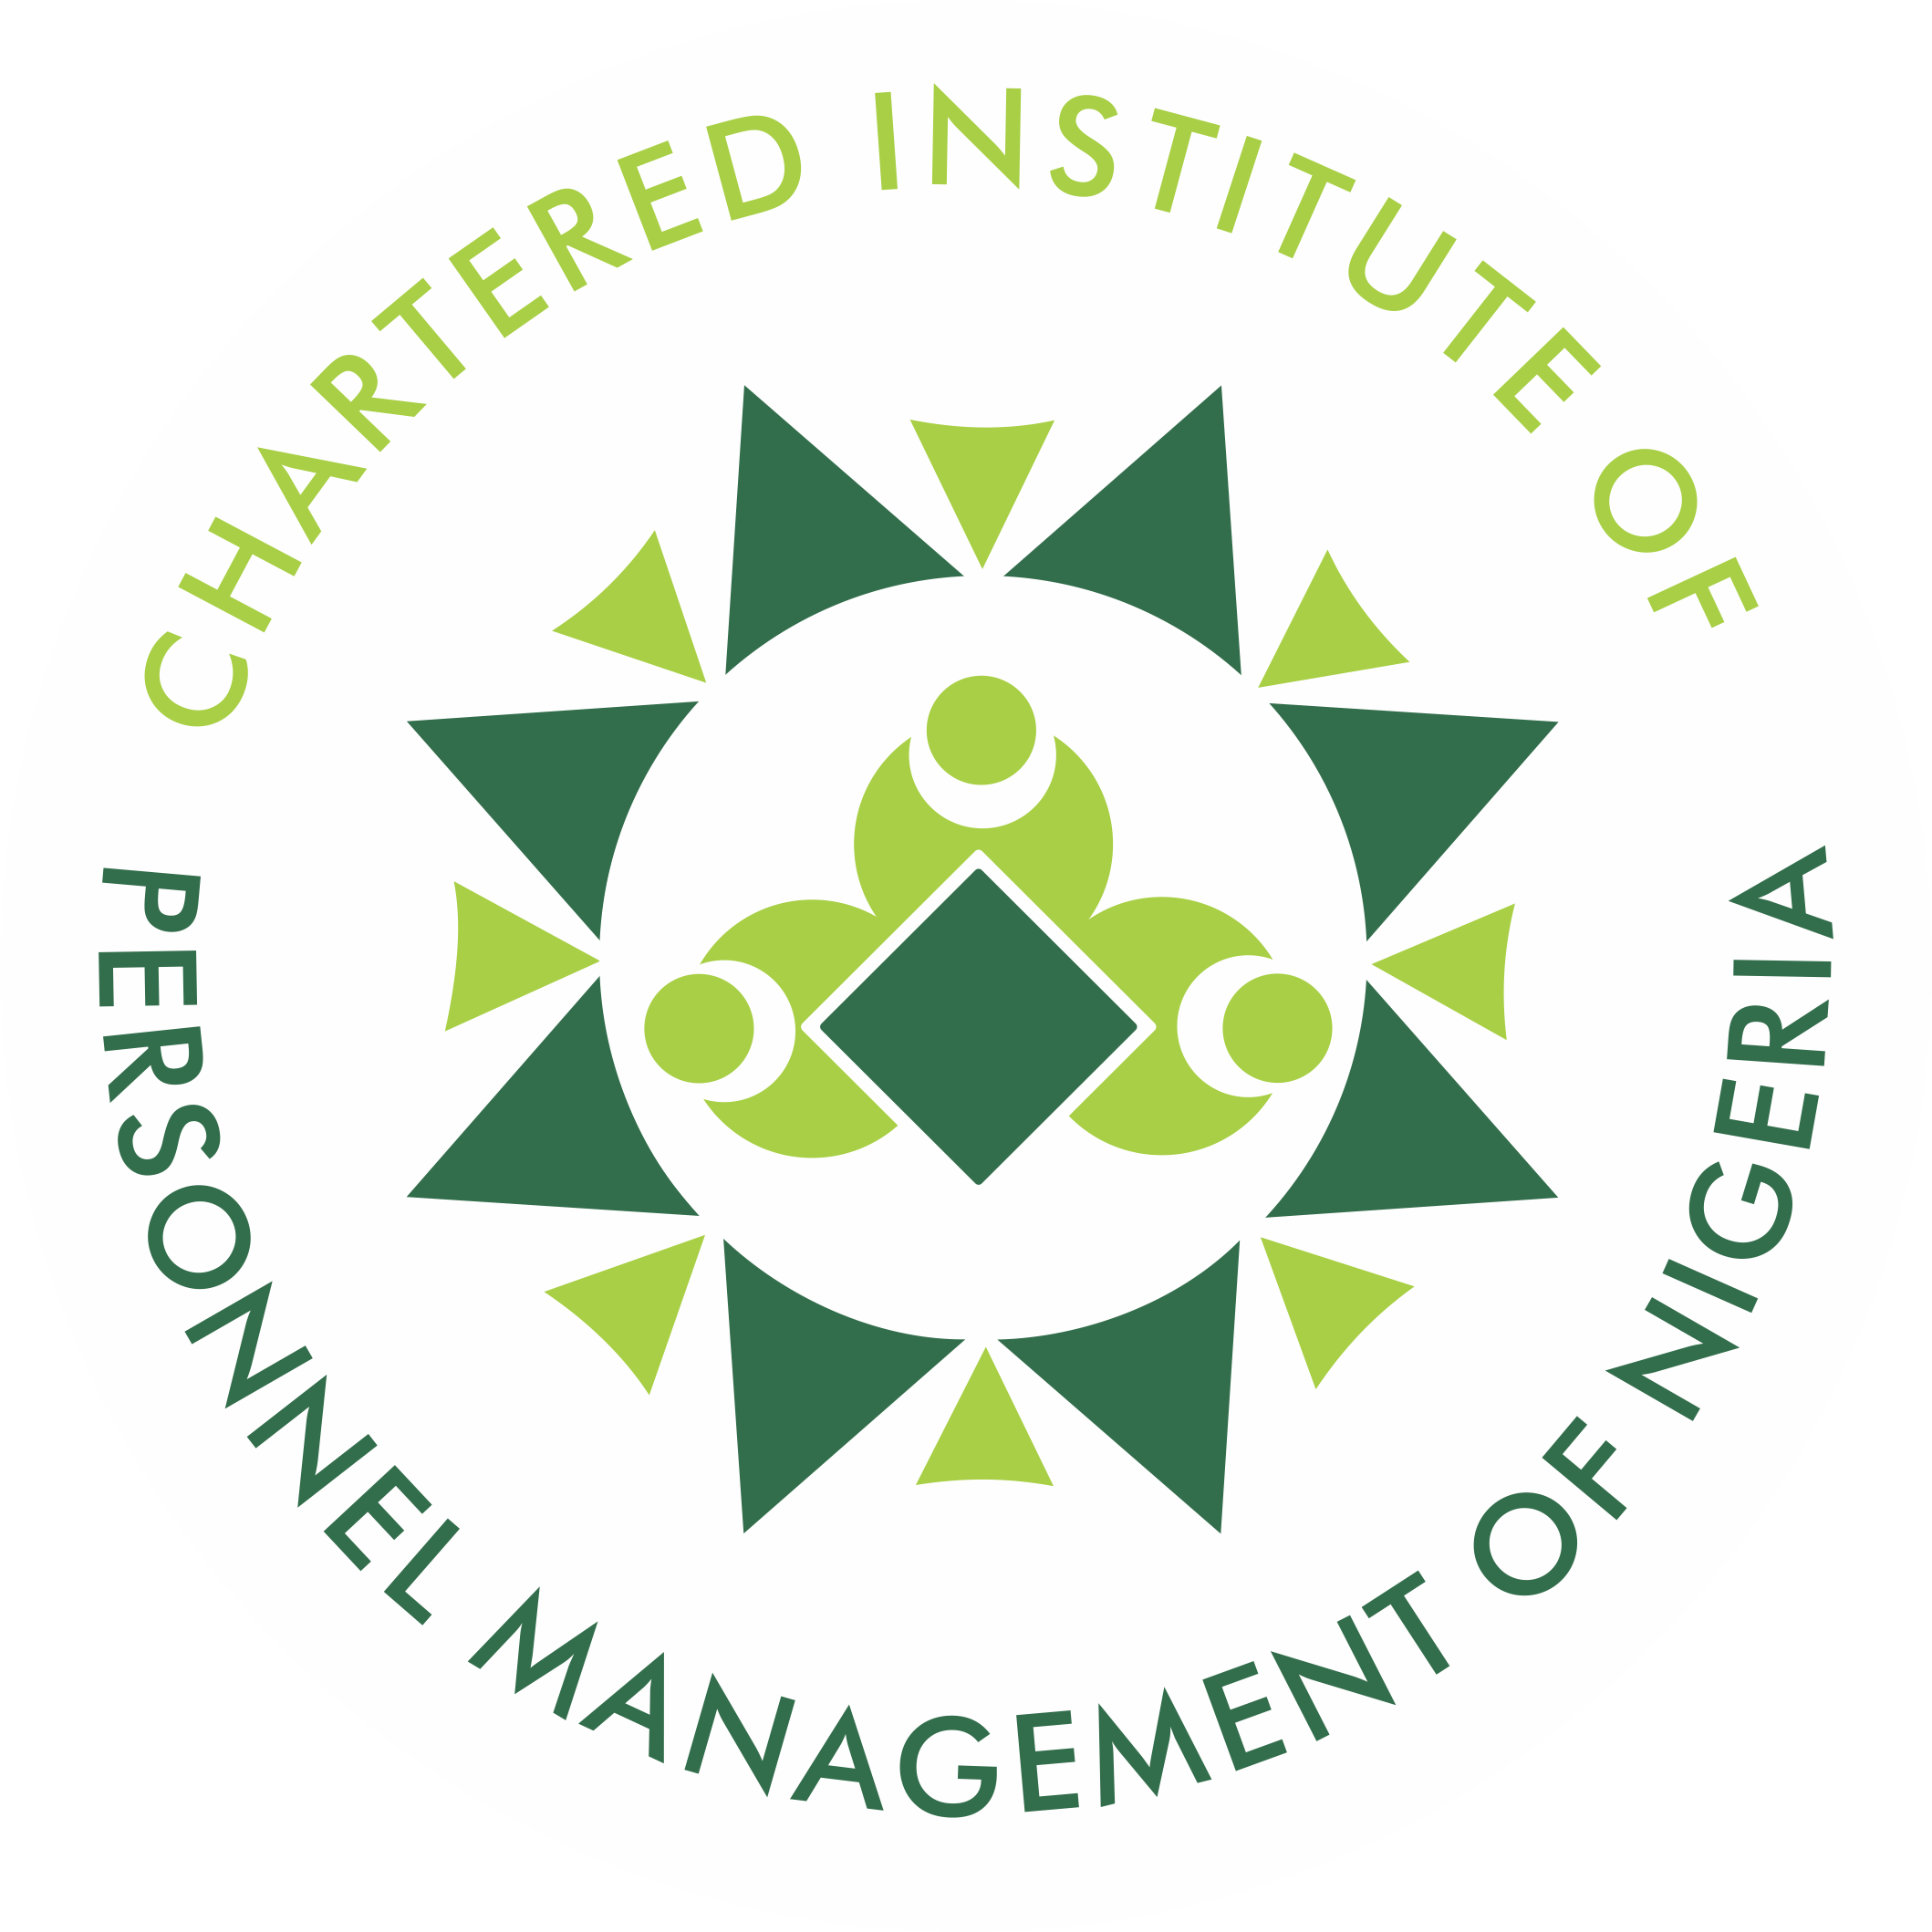 Chartered Institute of Personnel Management of Nigeria, Ogun State Branch